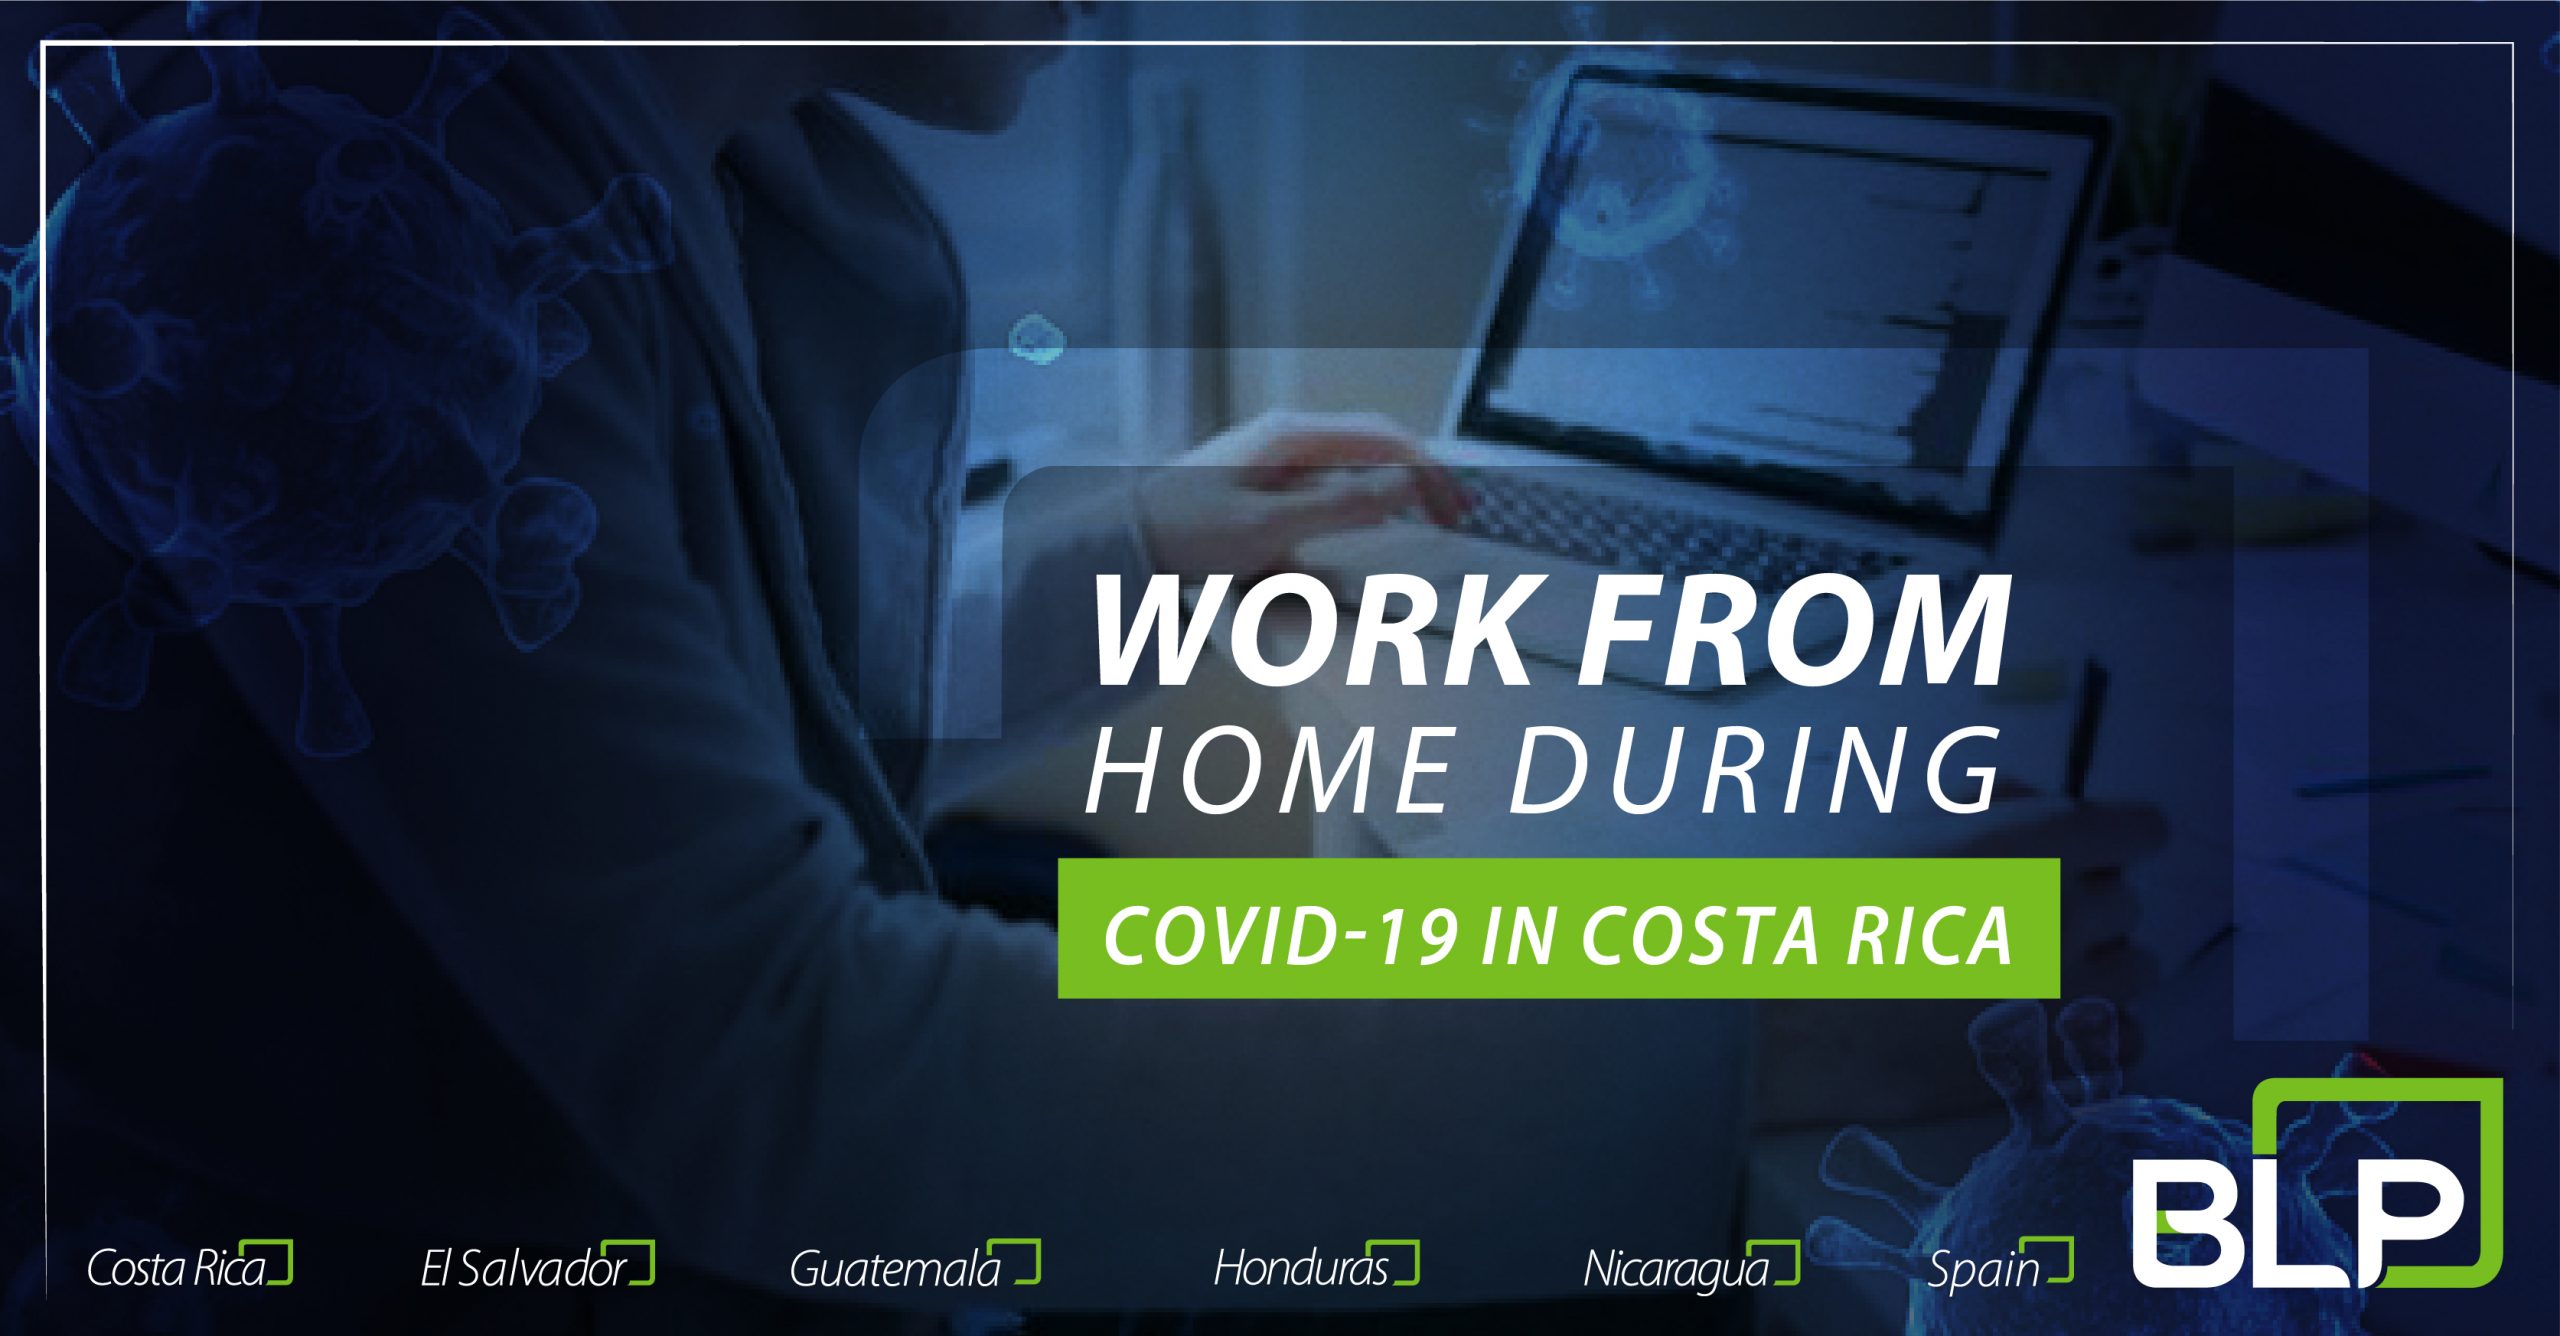 Work from home during COVID-19 in Costa Rica